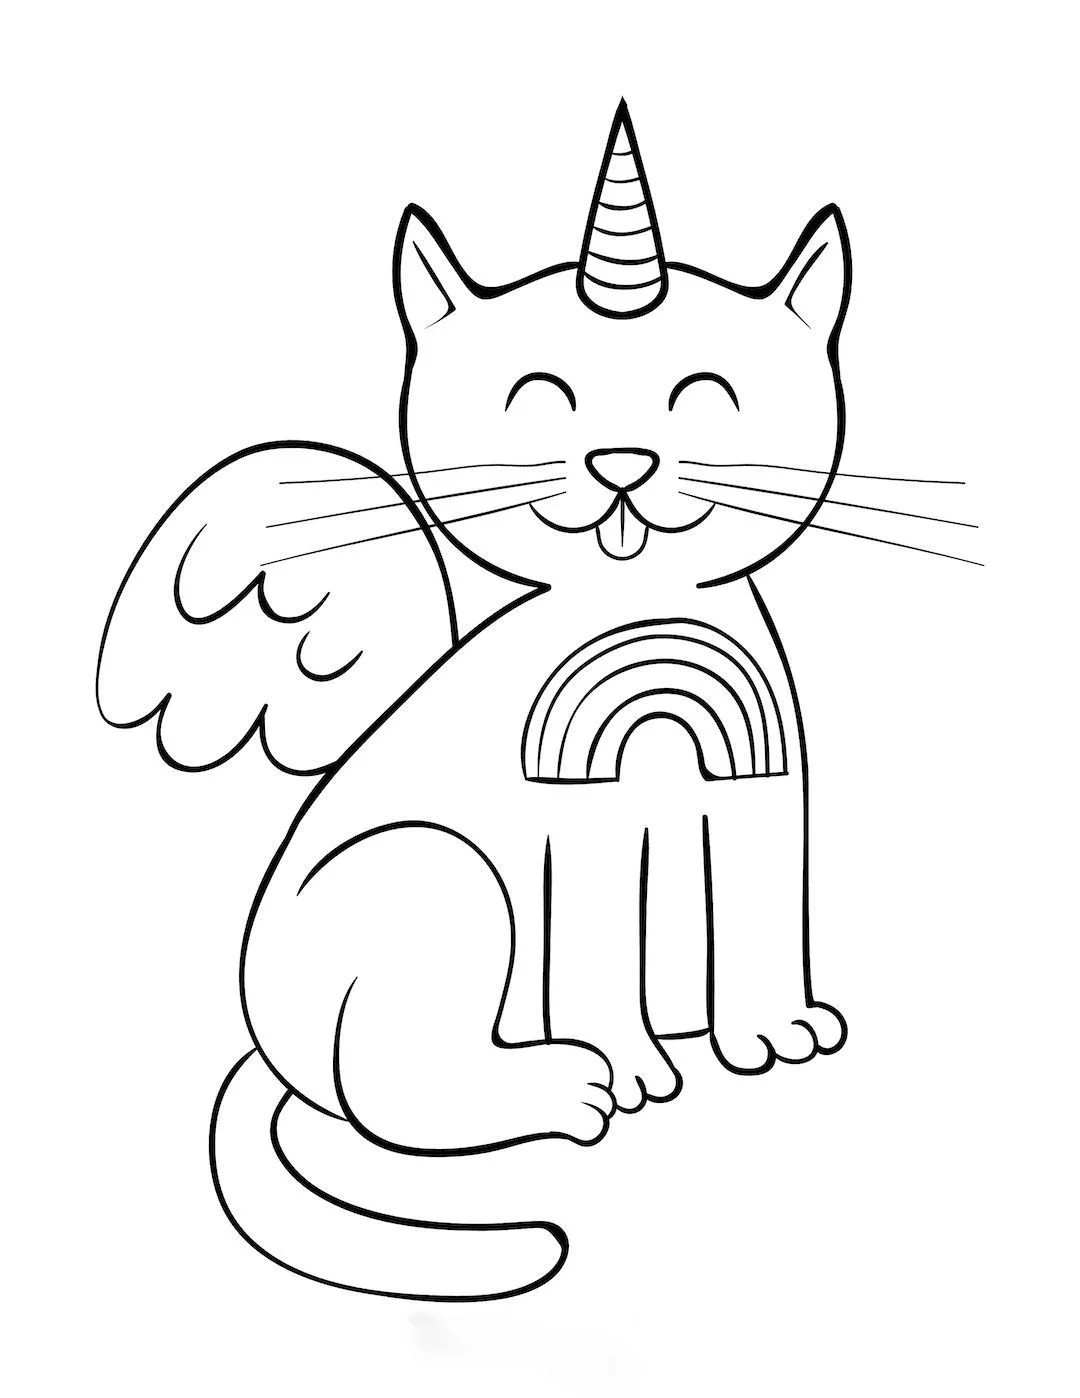 Winged Cat Coloring Pages